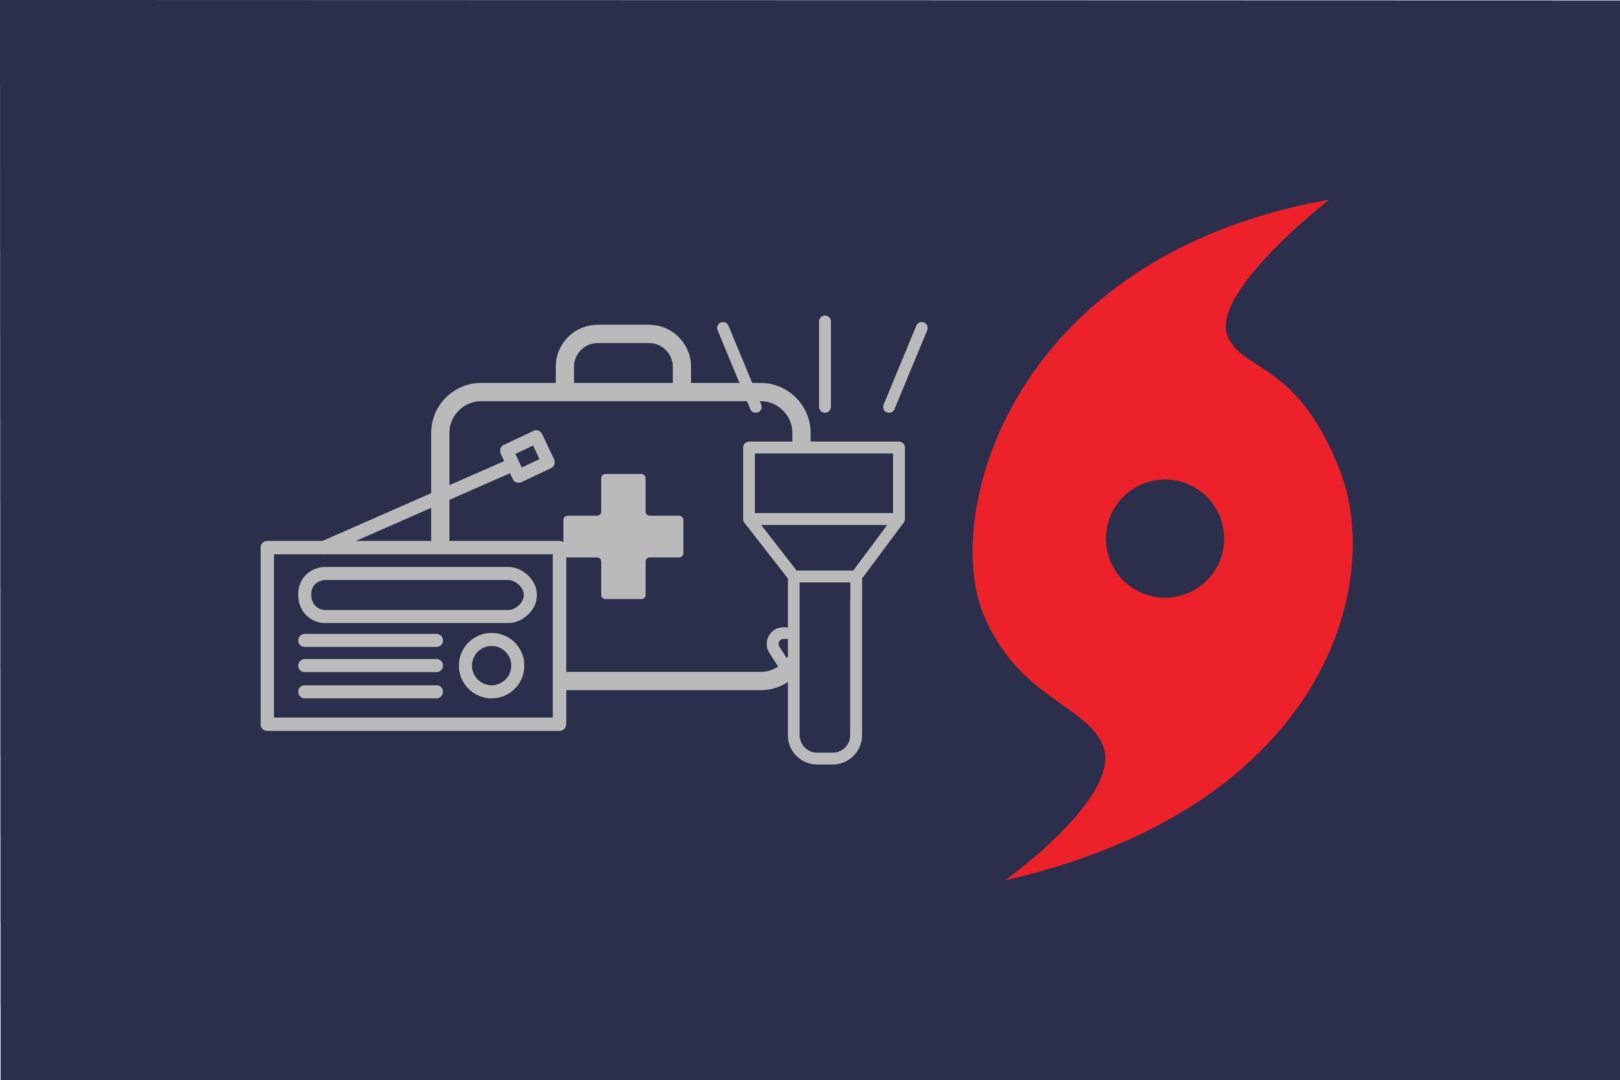 Grey graphics of a flashlight, first aid kit, and radio, and a red hurricane icon, all on a dark blue background.